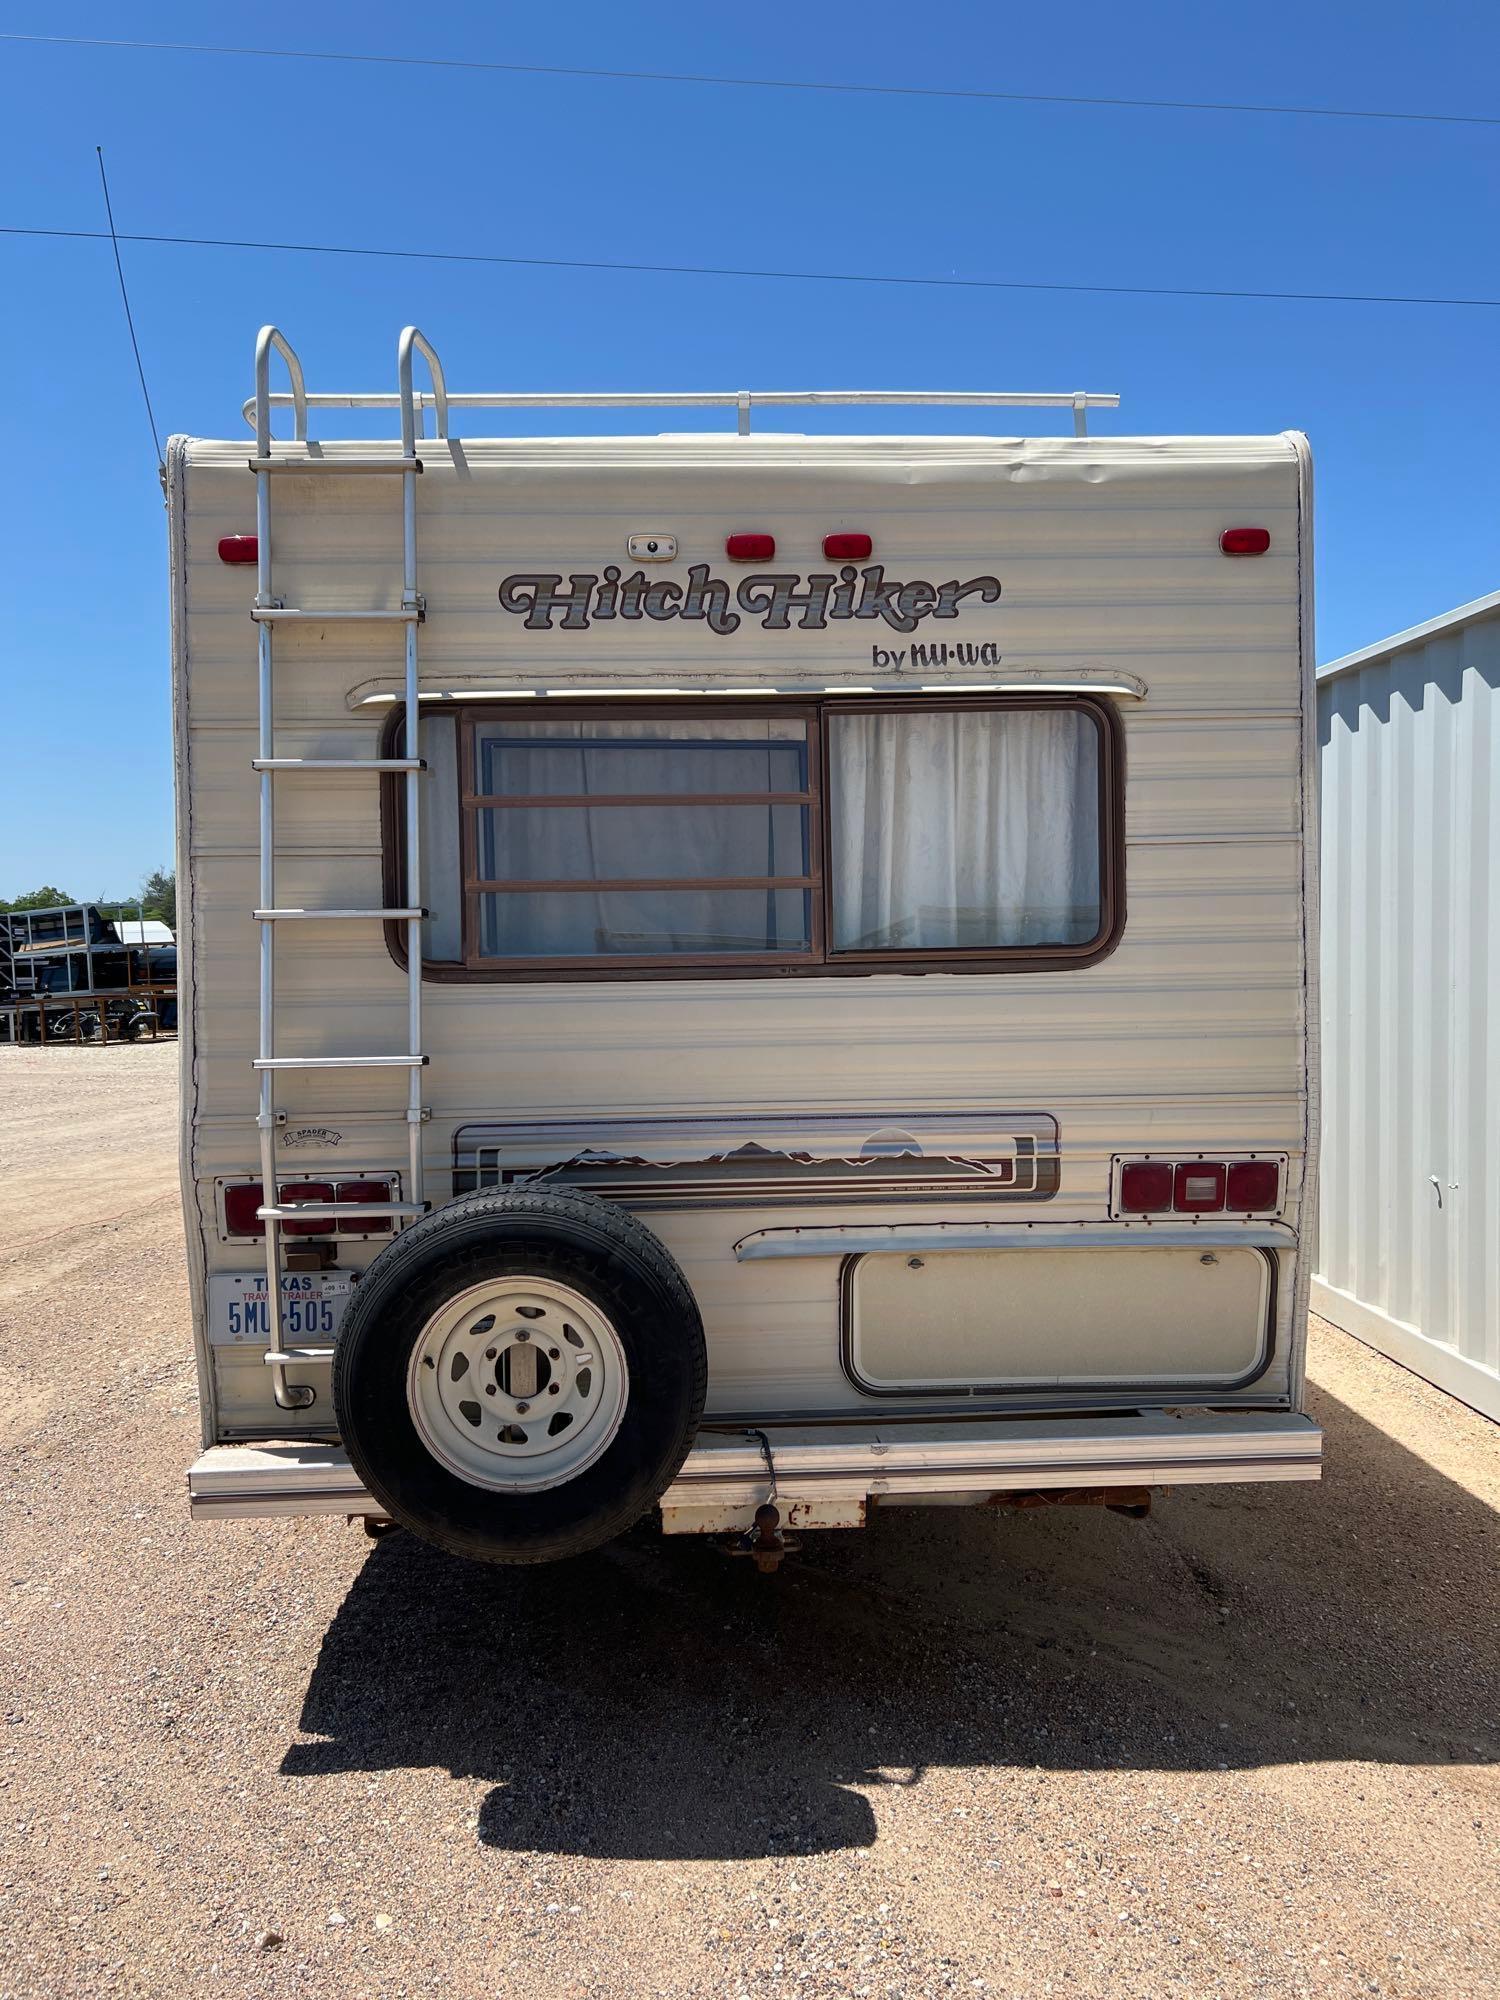 1990 Hitch Hiker 5th Wheel Travel Trailer with Slide-Out, Awning, Couch and Recliner VIN 43283